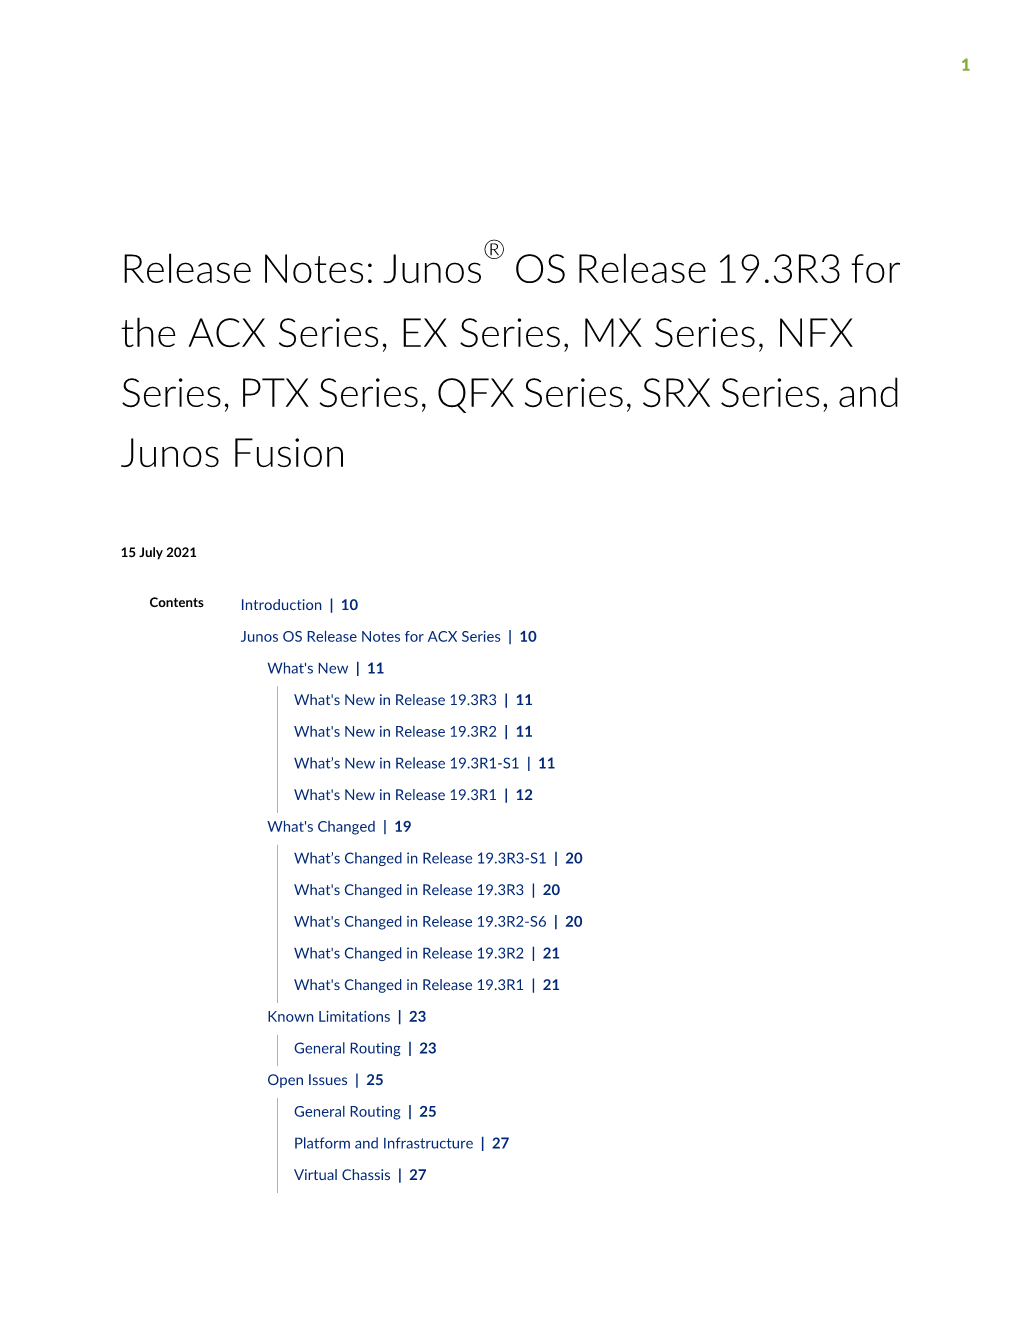 Junos® OS Release 19.3R3 for the ACX Series, EX Series, MX Series, NFX Series, PTX Series, QFX Series, SRX Series, and Junos Fusion